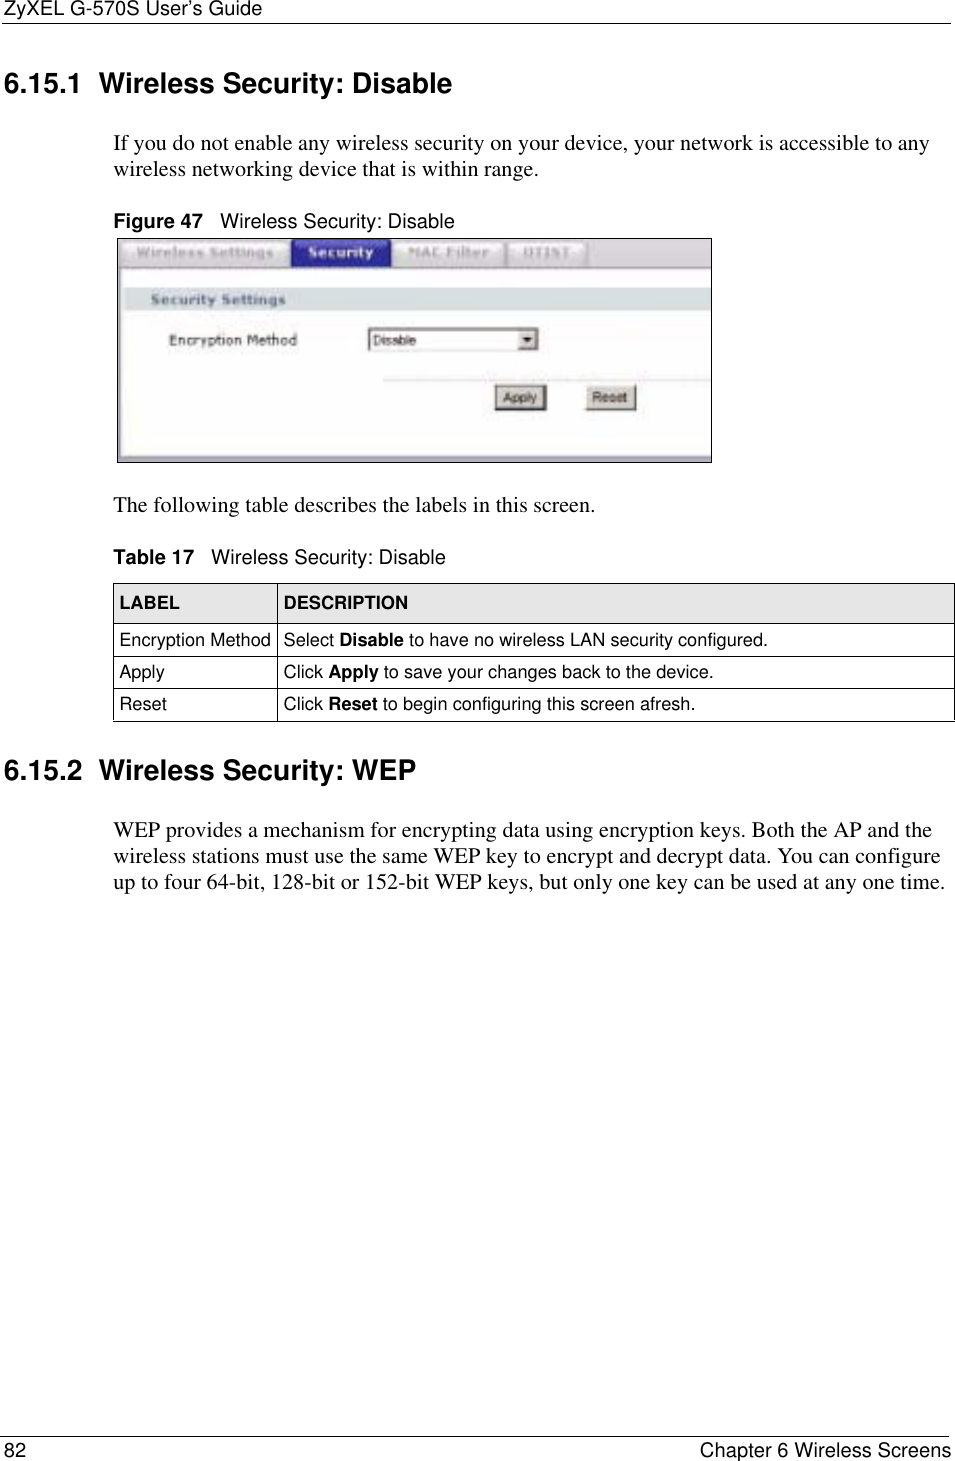 ZyXEL G-570S User’s Guide82 Chapter 6 Wireless Screens6.15.1  Wireless Security: Disable If you do not enable any wireless security on your device, your network is accessible to any wireless networking device that is within range.Figure 47   Wireless Security: DisableThe following table describes the labels in this screen. 6.15.2  Wireless Security: WEP WEP provides a mechanism for encrypting data using encryption keys. Both the AP and the wireless stations must use the same WEP key to encrypt and decrypt data. You can configure up to four 64-bit, 128-bit or 152-bit WEP keys, but only one key can be used at any one time.Table 17   Wireless Security: DisableLABEL DESCRIPTIONEncryption Method Select Disable to have no wireless LAN security configured.Apply Click Apply to save your changes back to the device.Reset Click Reset to begin configuring this screen afresh.